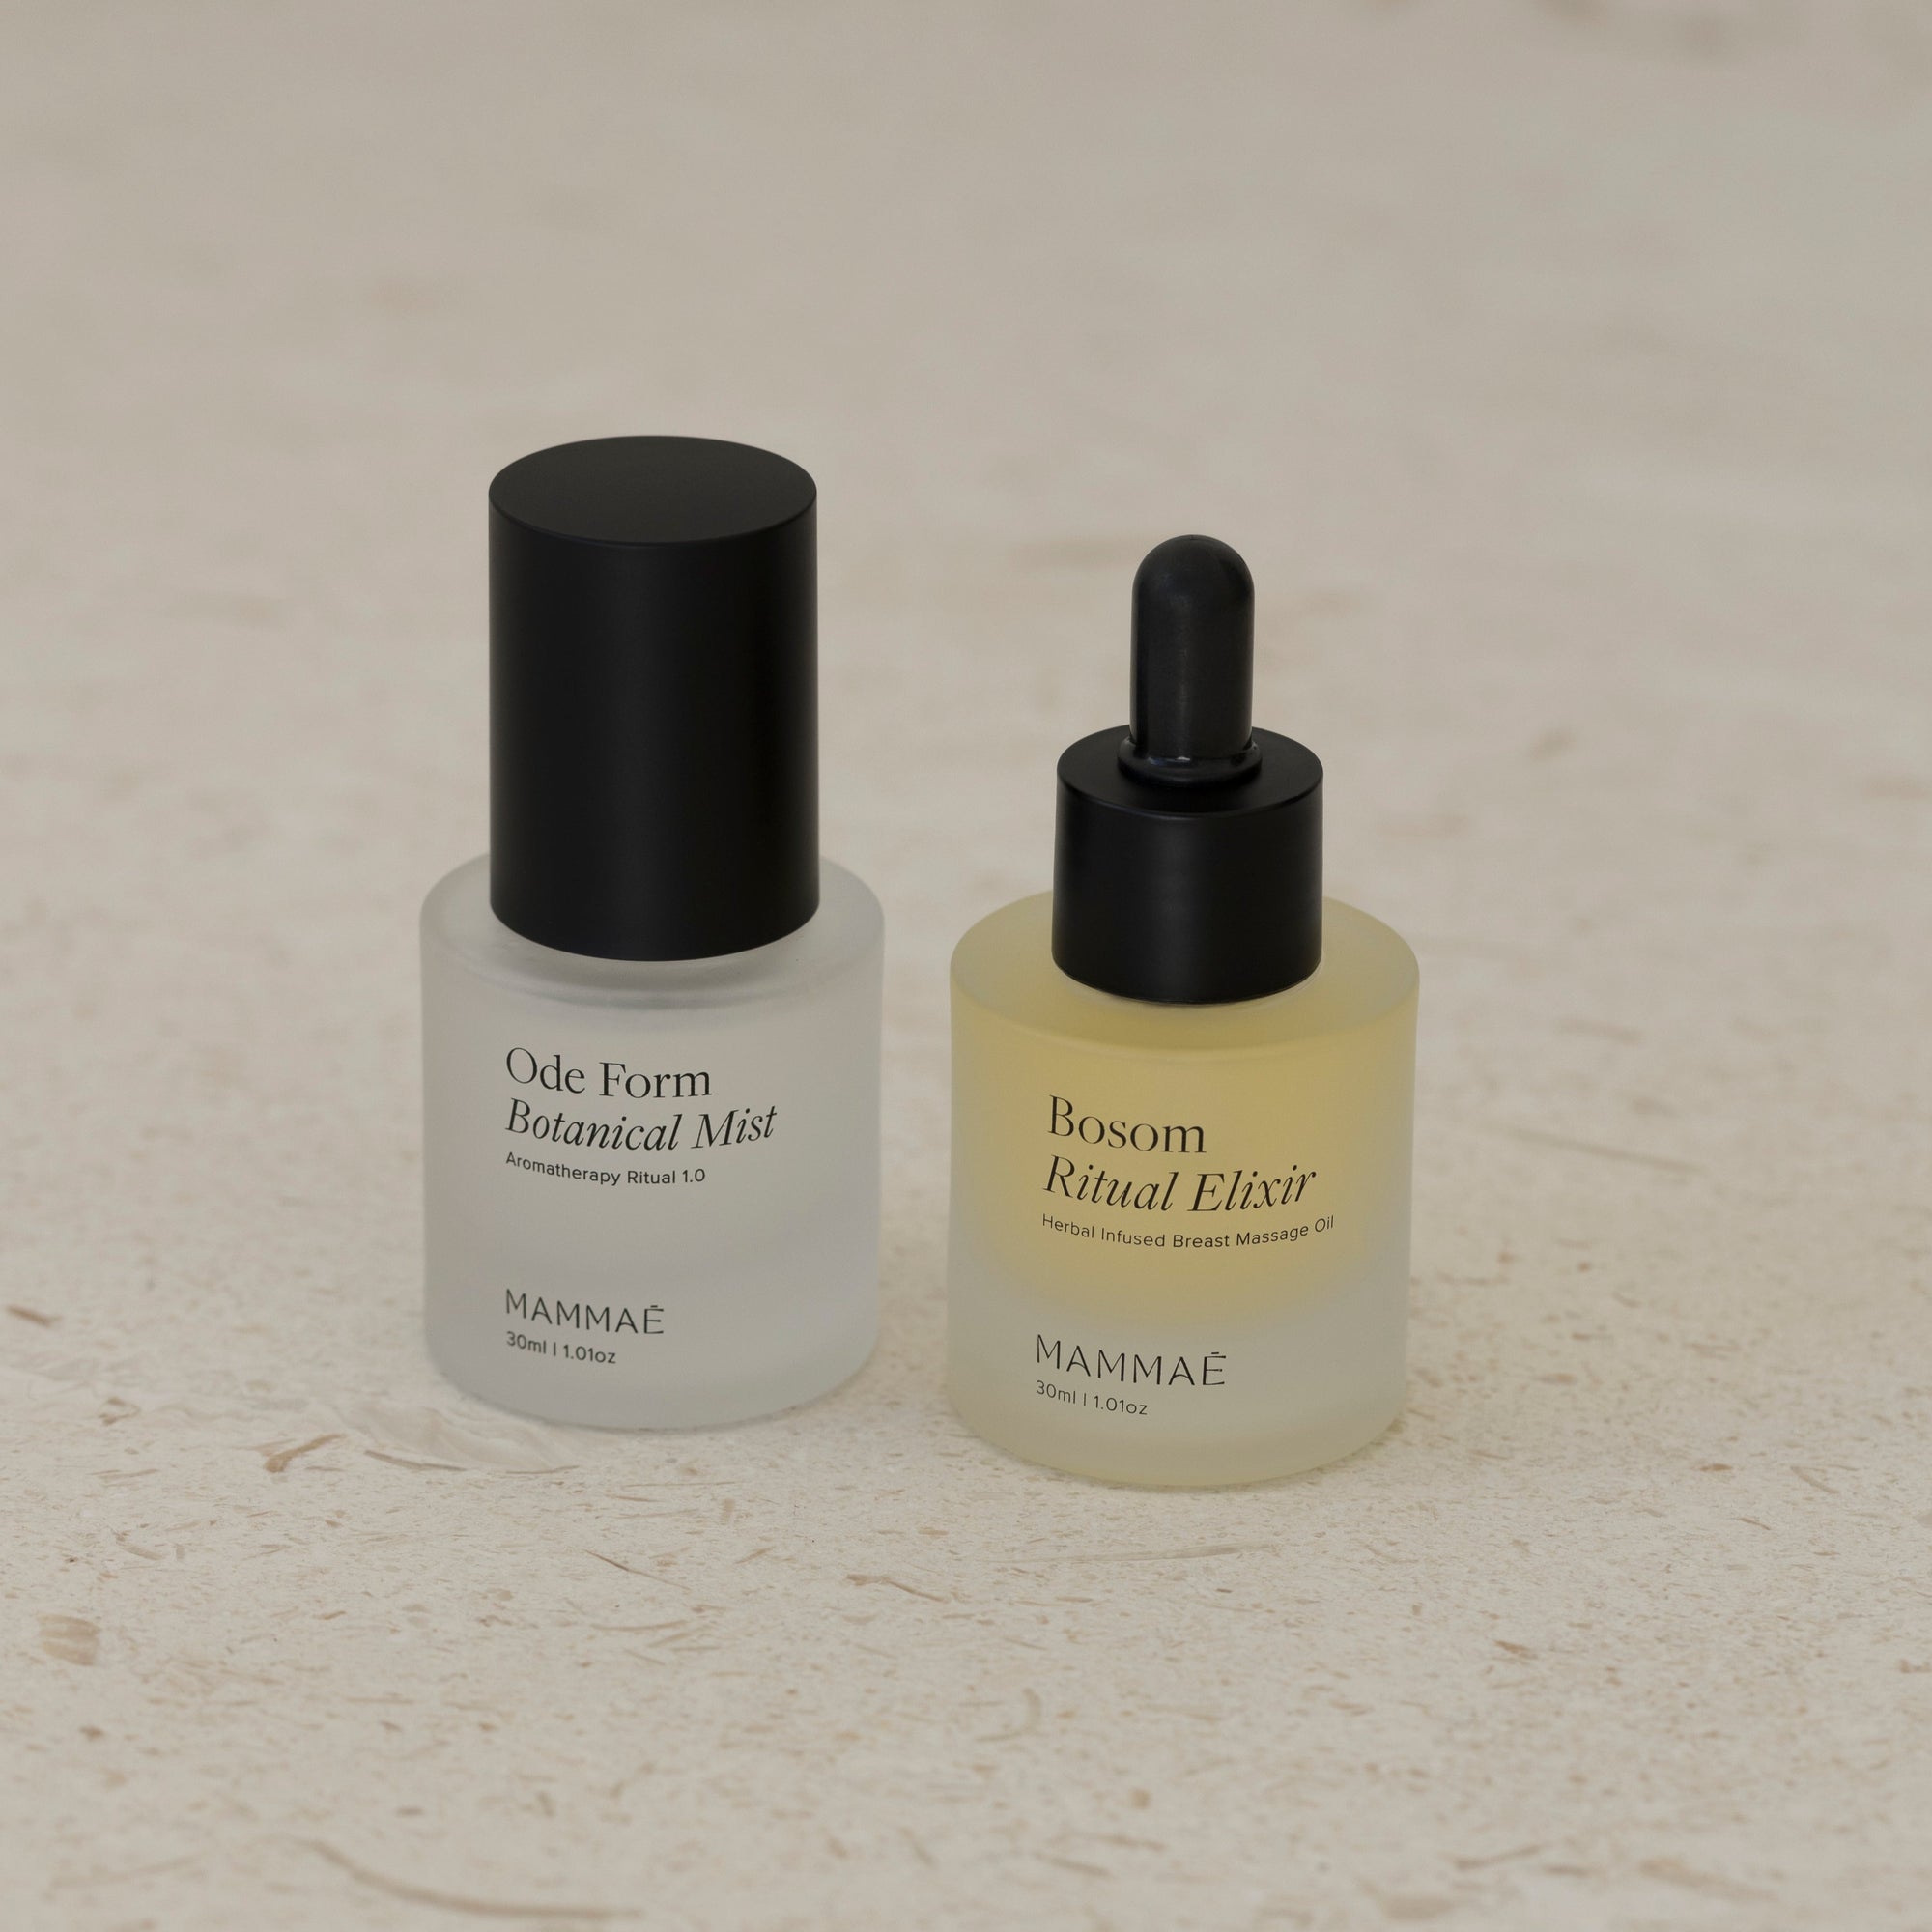 An EXCLUSIVE mini ritual duo bundle from Mammae - a bottle of facial oil gracefully placed on a pristine white surface.